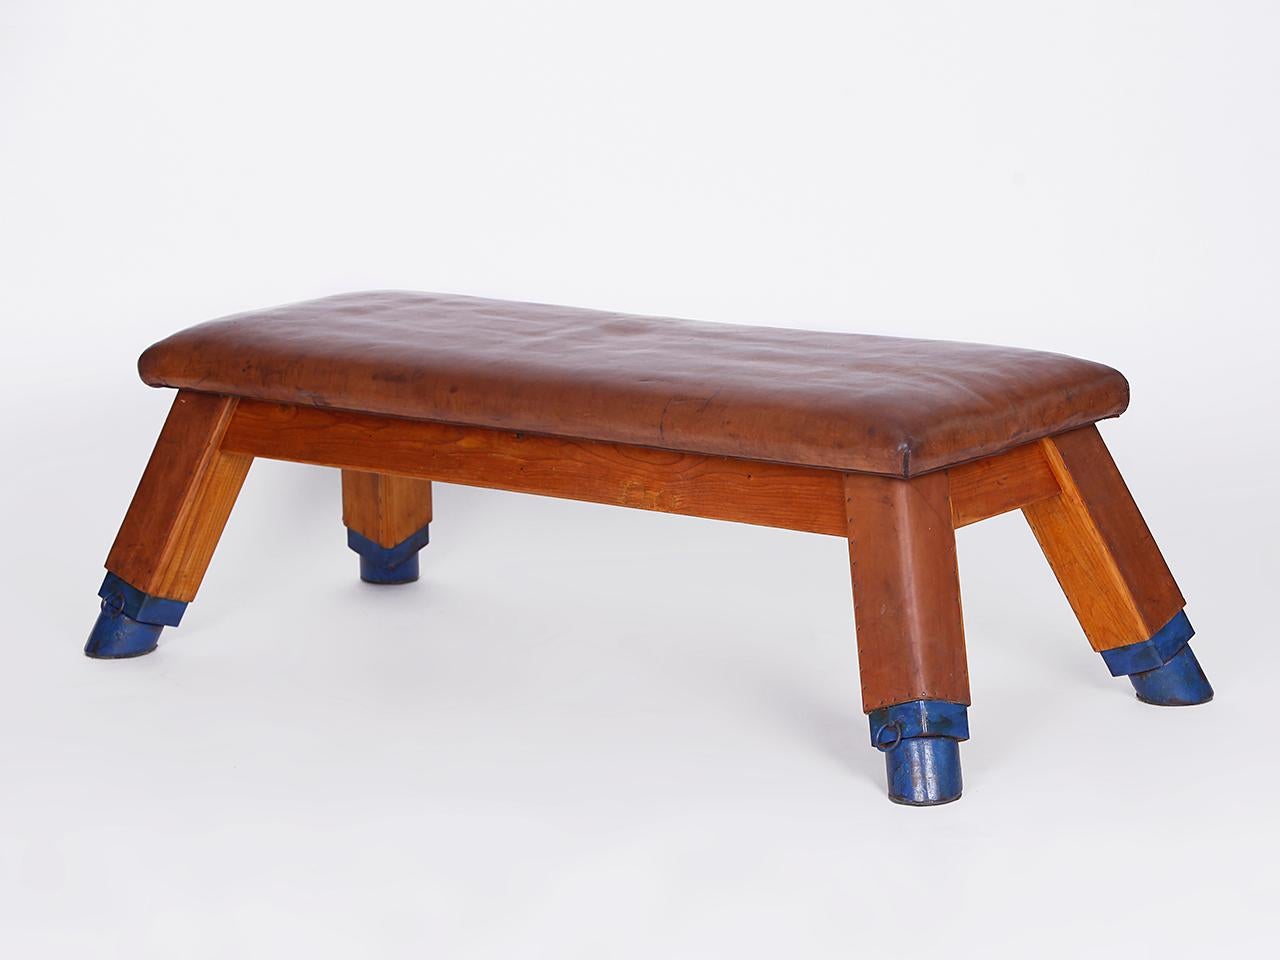 20th Century Gymnastic Vintage Leather Pommel Horse Gym Bench Top, 1930s For Sale